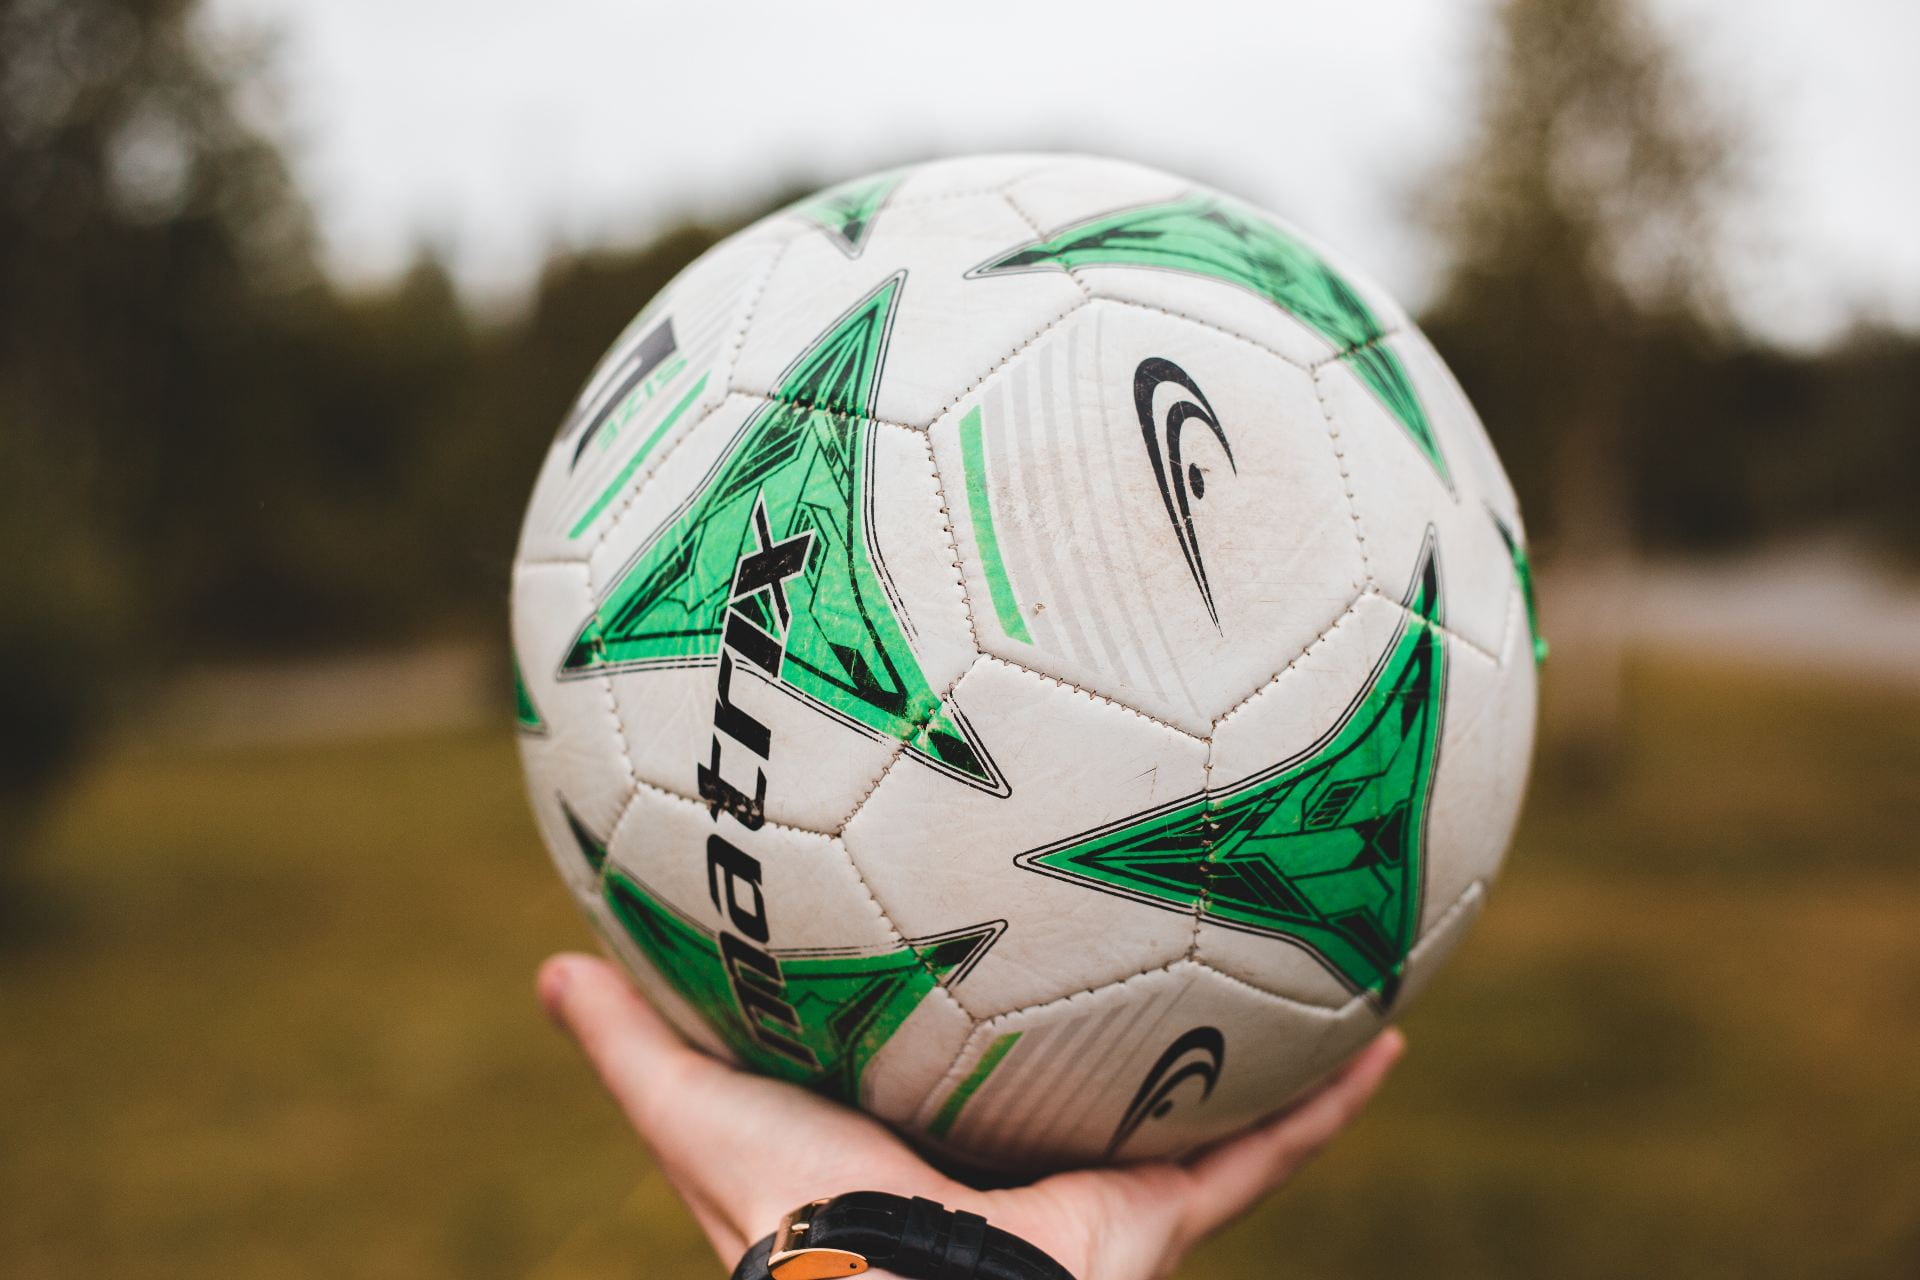 A photo of a hand holding a white fooball with green patterns on